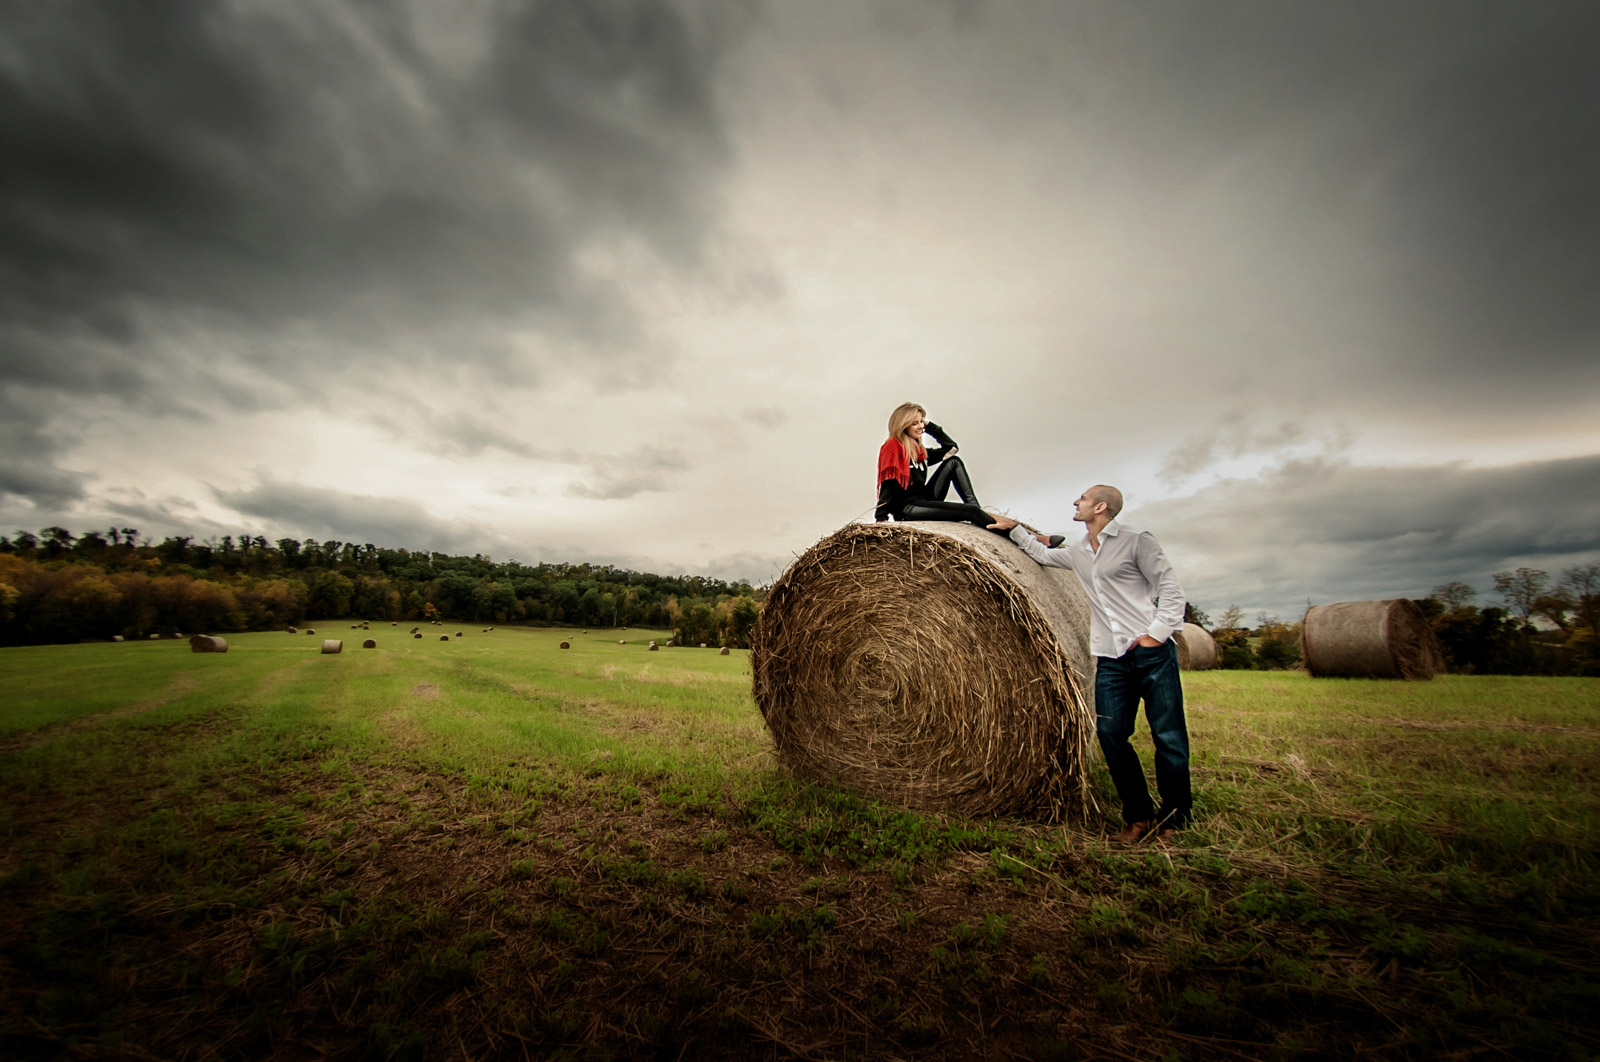 Engagement Session on a bale of hay in a country field